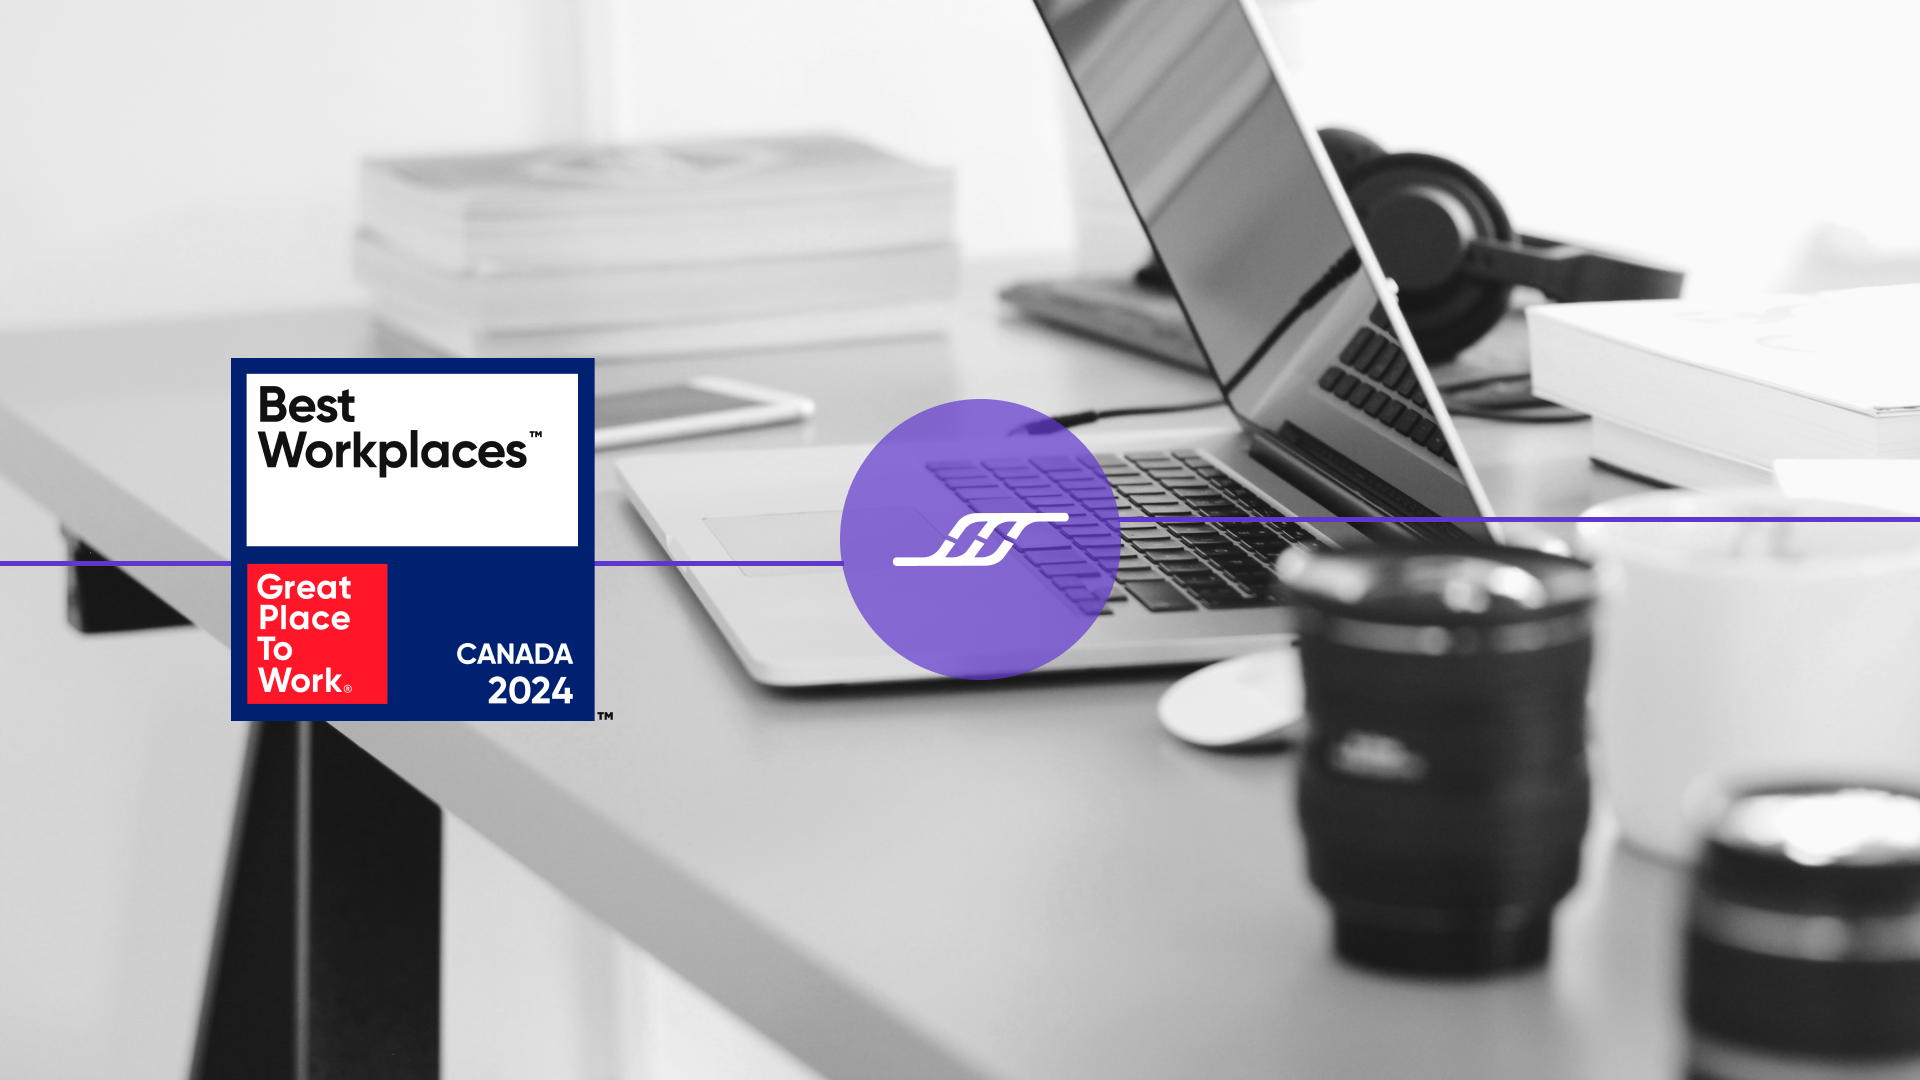 Infostrux Named One of the Best WorkplacesTM in Canada for 2024! (1)